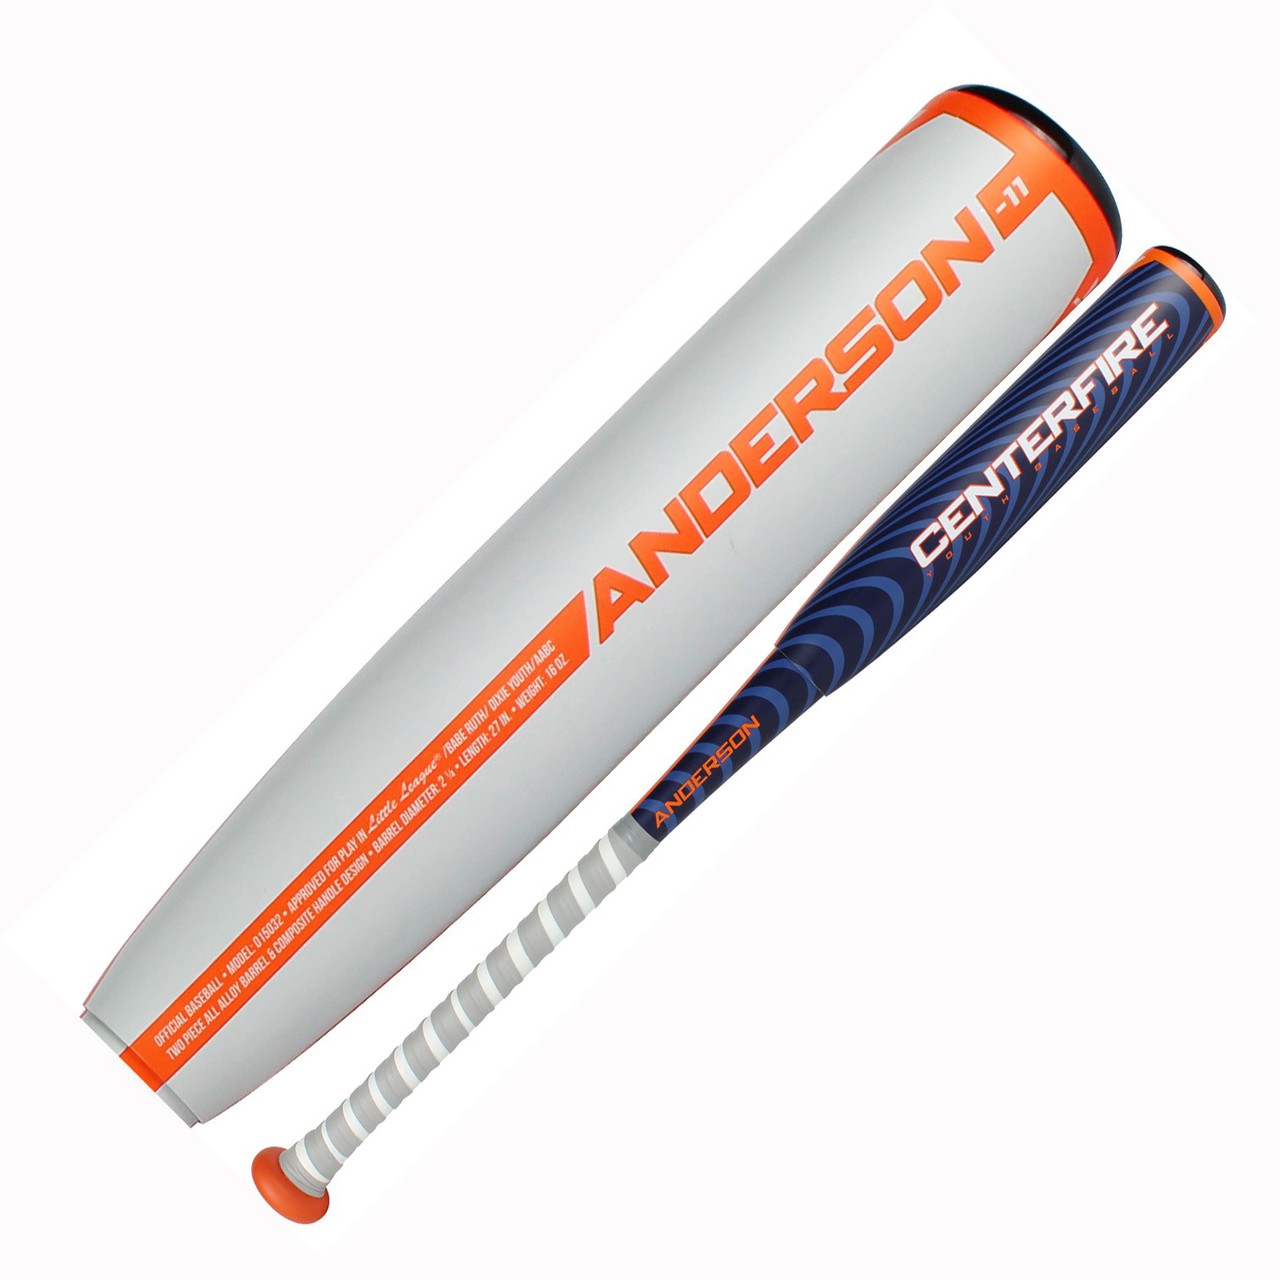 anderson-centerfire-29-inch-18-oz-youth-baseball-bat 015032-29-inch-18-oz Anderson 874147007693 The Anderson Centerfire baseball bat is our latest addition to our